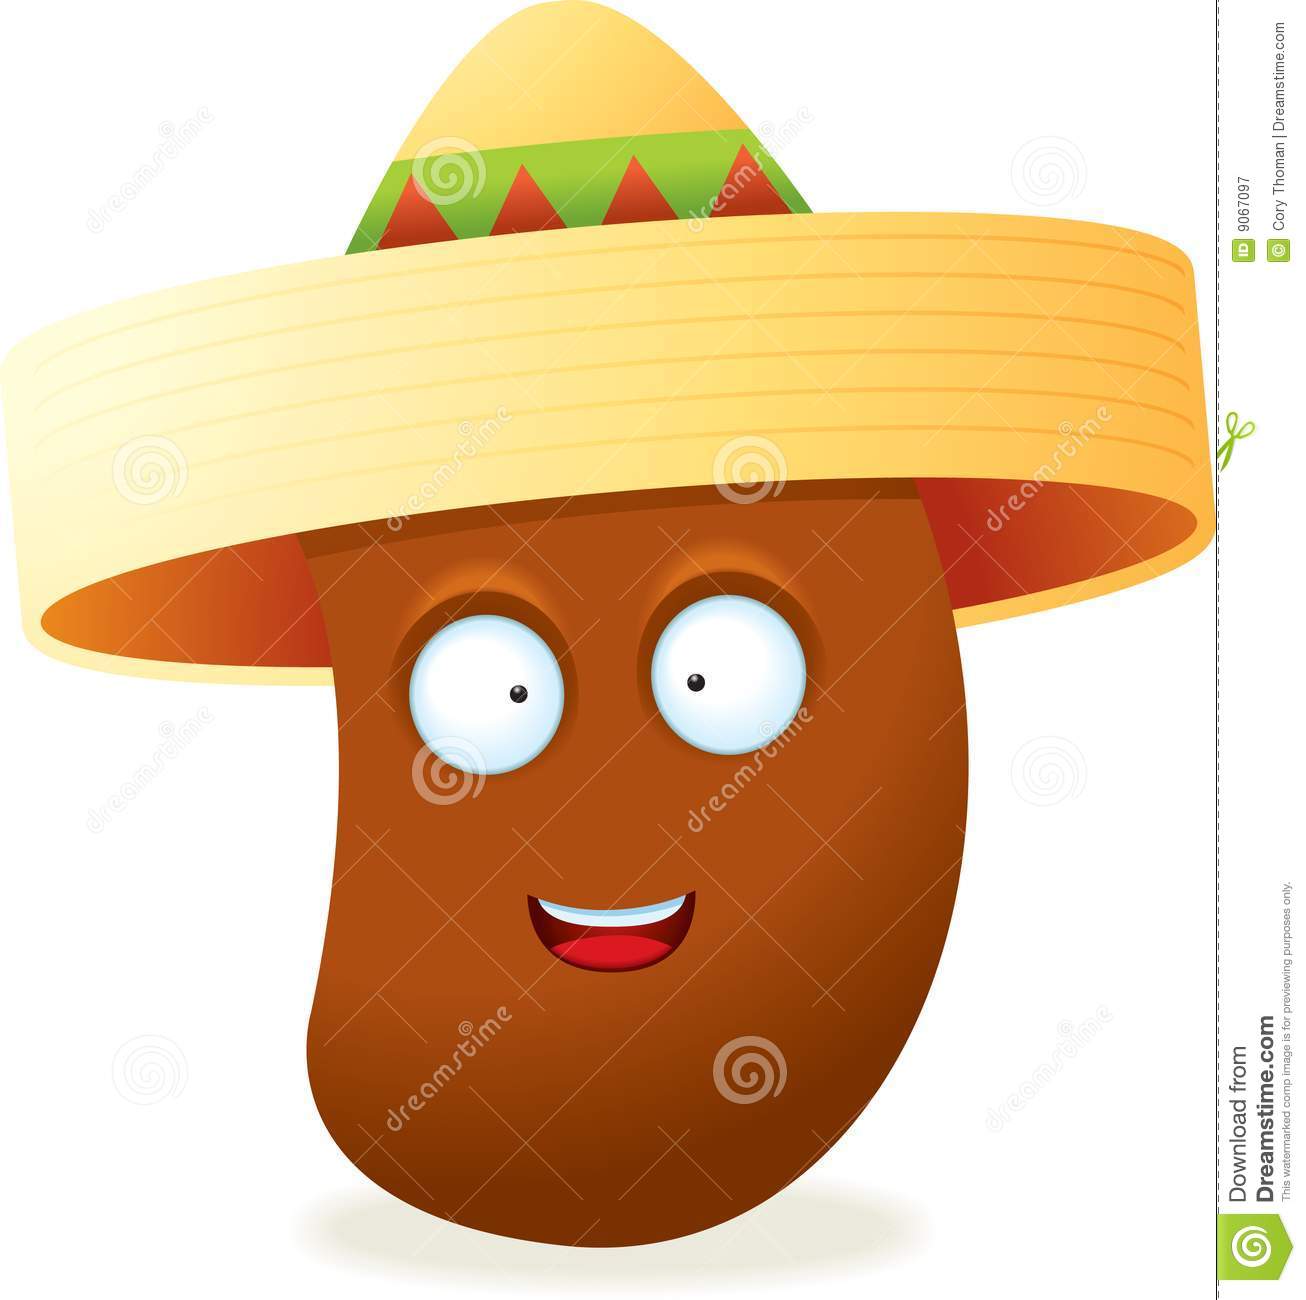 Mexican Jumping Bean Royalty Free Stock Photography   Image  9067097